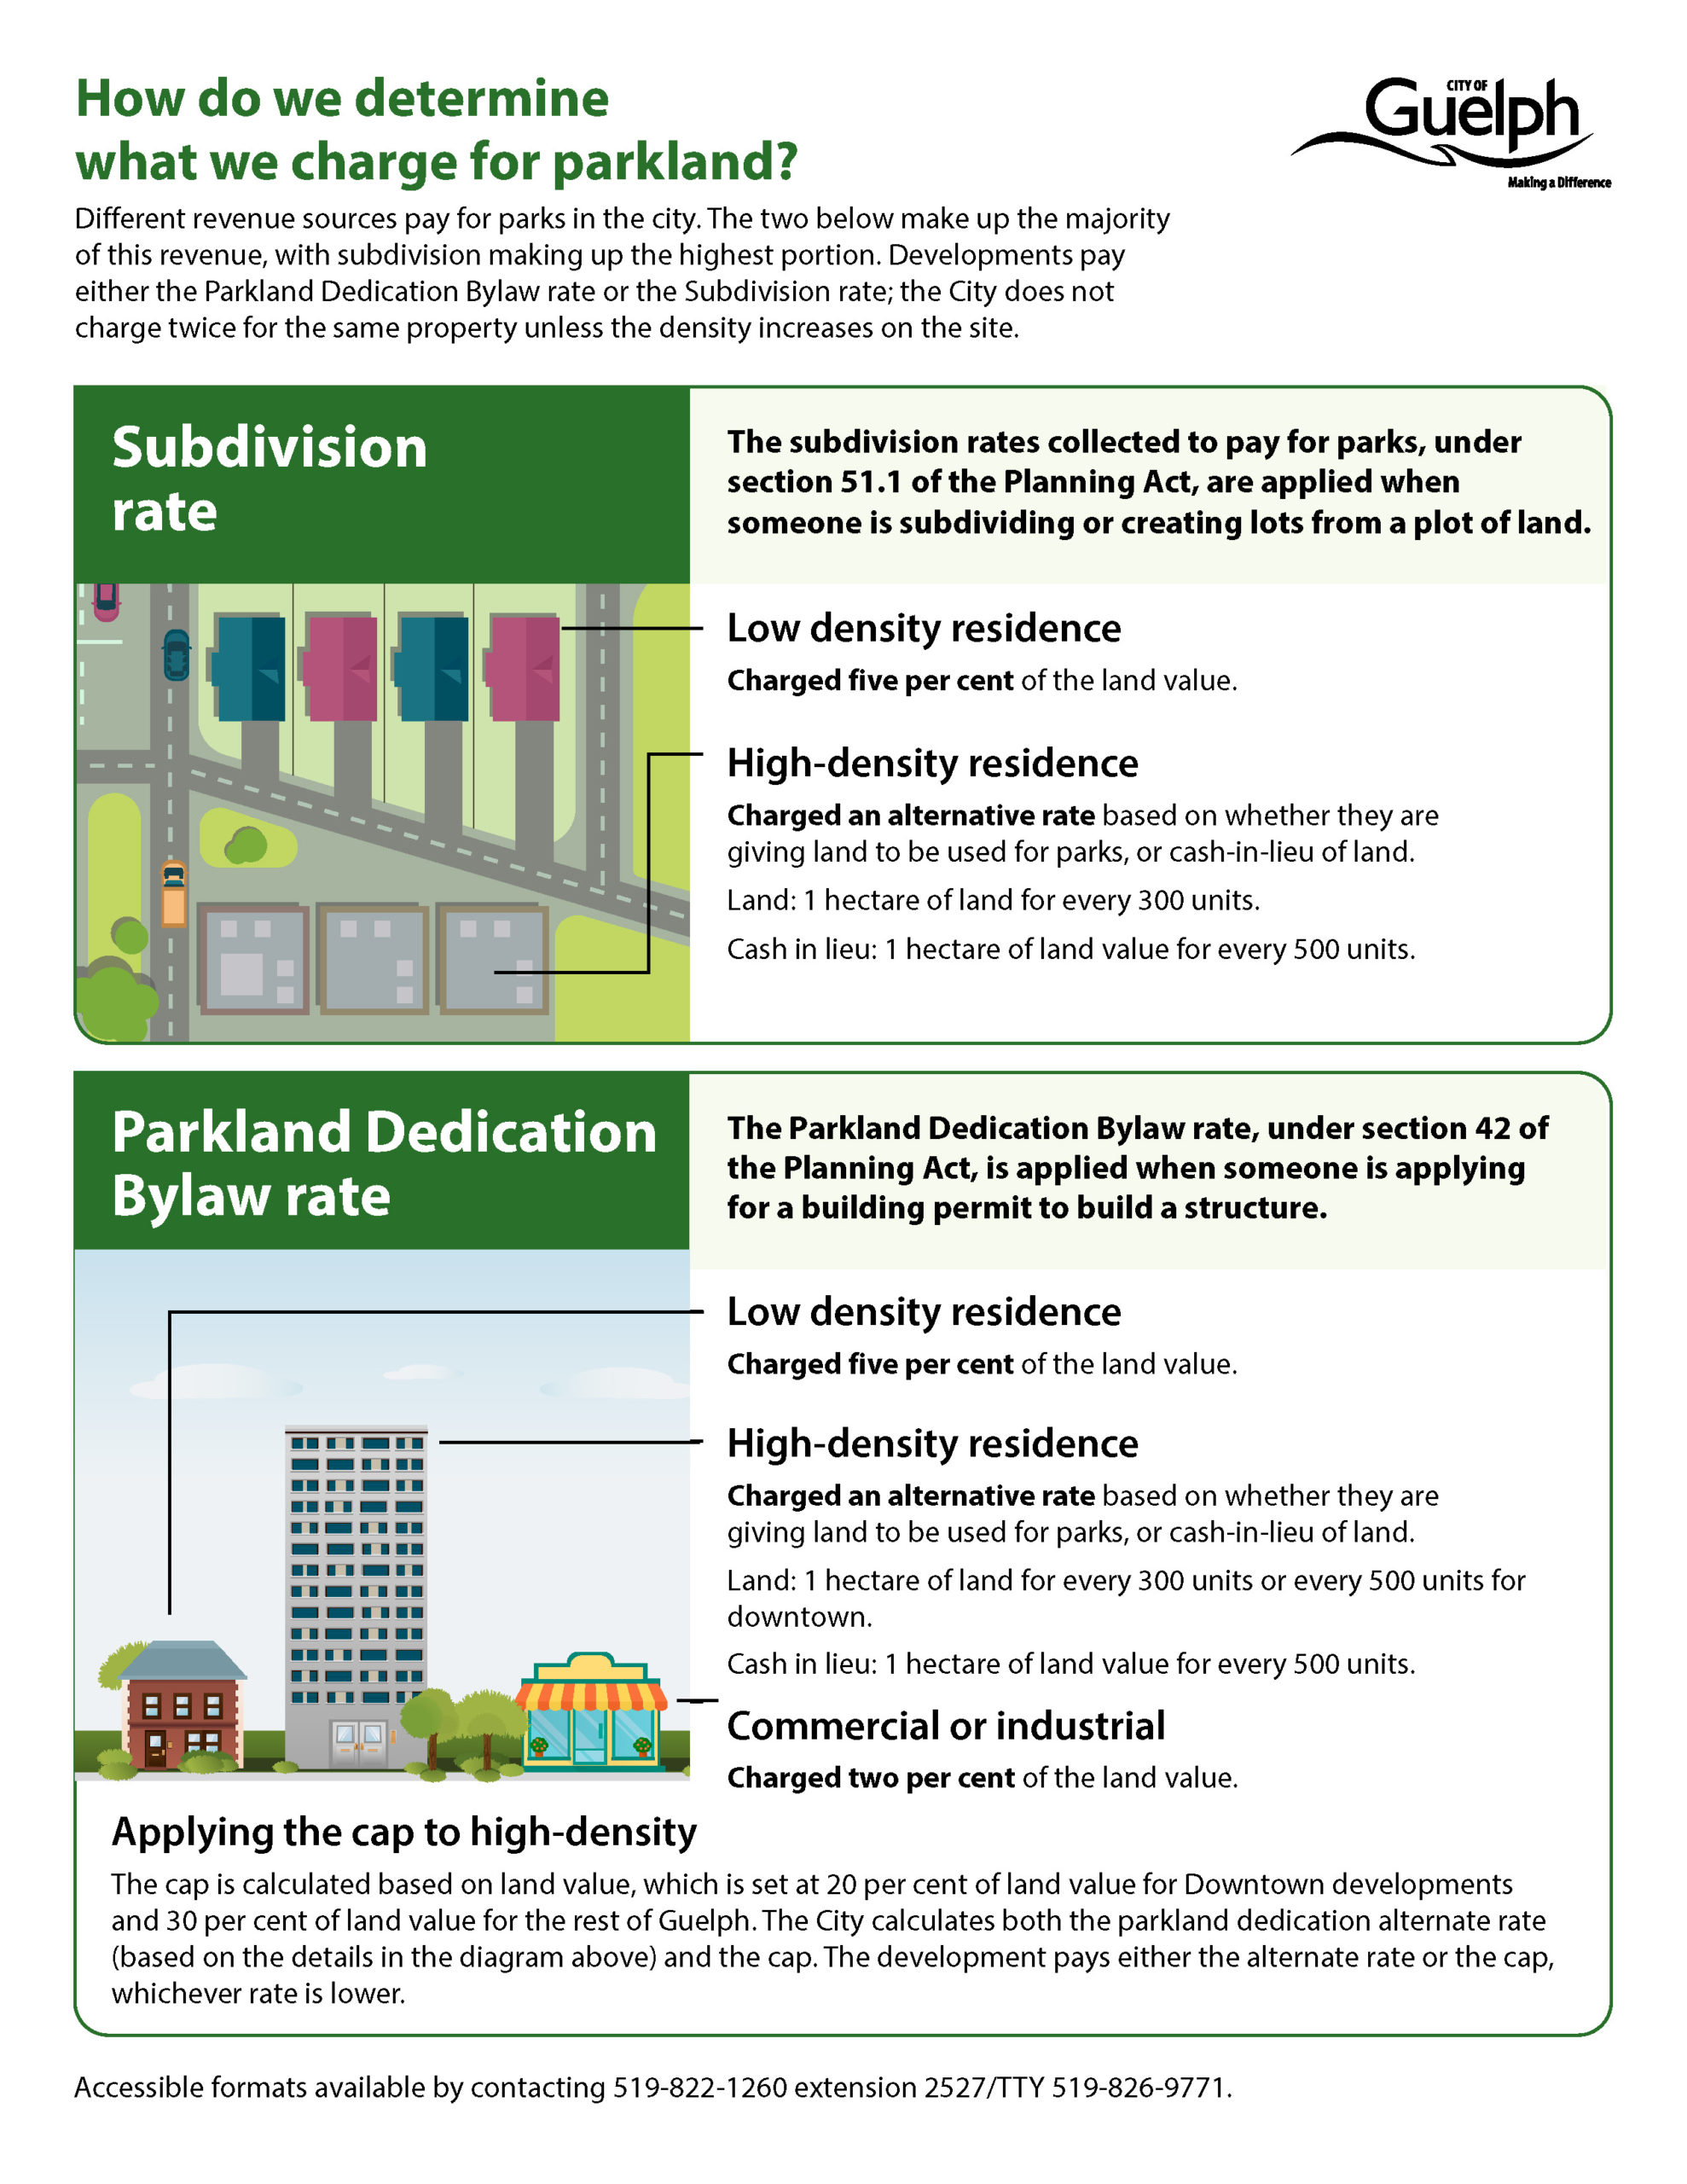 Different revenue sources pay for parks in the city. The two below make up the majority of this revenue, with subdivision making up the highest portion. Developments pay either the Parkland Dedication Bylaw rate or the Subdivision rate; the City does not charge twice for the same property unless the density increases on the site. Subdivision rate: The subdivision rates collected to pay for parks, under section 51.1 of the Planning Act, are applied when someone is subdividing or creating lots from a plot of land. Low density residence Charged five per cent of the land value. High-density residence Charged an alternative rate based on whether they are giving land to be used for parks, or cash-in-lieu of land. Land: 1 hectare of land for every 300 units. Cash in lieu: 1 hectare of land value for every 500 units. Parkland Dedication Bylaw rate The Parkland Dedication Bylaw rate, under section 42 of the Planning Act, is applied when someone is applying for a building permit to build a structure. Low density residence: Charged five per cent of the land value. High-density residence: Charged an alternative rate based on whether they are giving land to be used for parks, or cash-in-lieu of land. Land: 1 hectare of land for every 300 units or every 500 units for downtown. Cash in lieu: 1 hectare of land value for every 500 units. Commercial or industrial: Charged two per cent of the land value. Applying the cap to high-density: The cap is calculated based on land value, which is set at 20 per cent of land value for Downtown developments and 30 per cent of land value for the rest of Guelph. The City calculates both the parkland dedication alternate rate (based on the details in the diagram above) and the cap. The development pays either the alternate rate or the cap, whichever rate is lower. Accessible formats available by contacting 519-822-1260 extension 2527/TTY 519-826-9771.